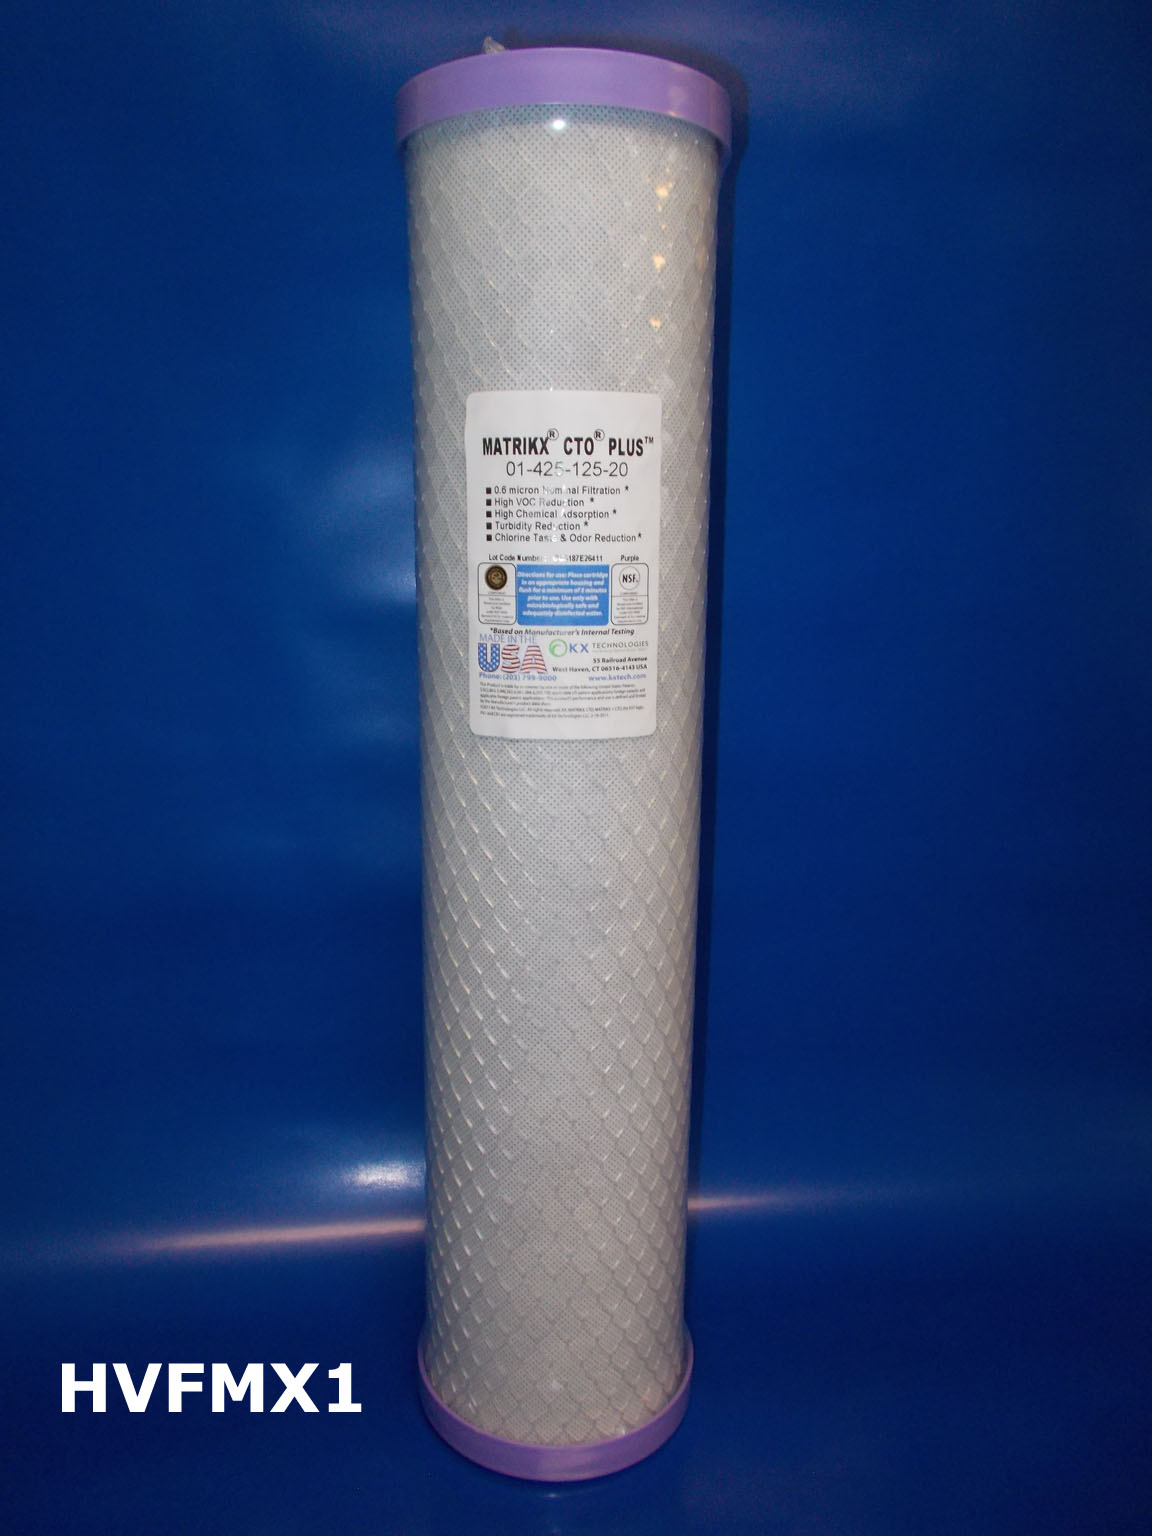 Replacement whole house chlorine water filter. Chlorine removal for 150,000 gallons - 4.5" x 20"